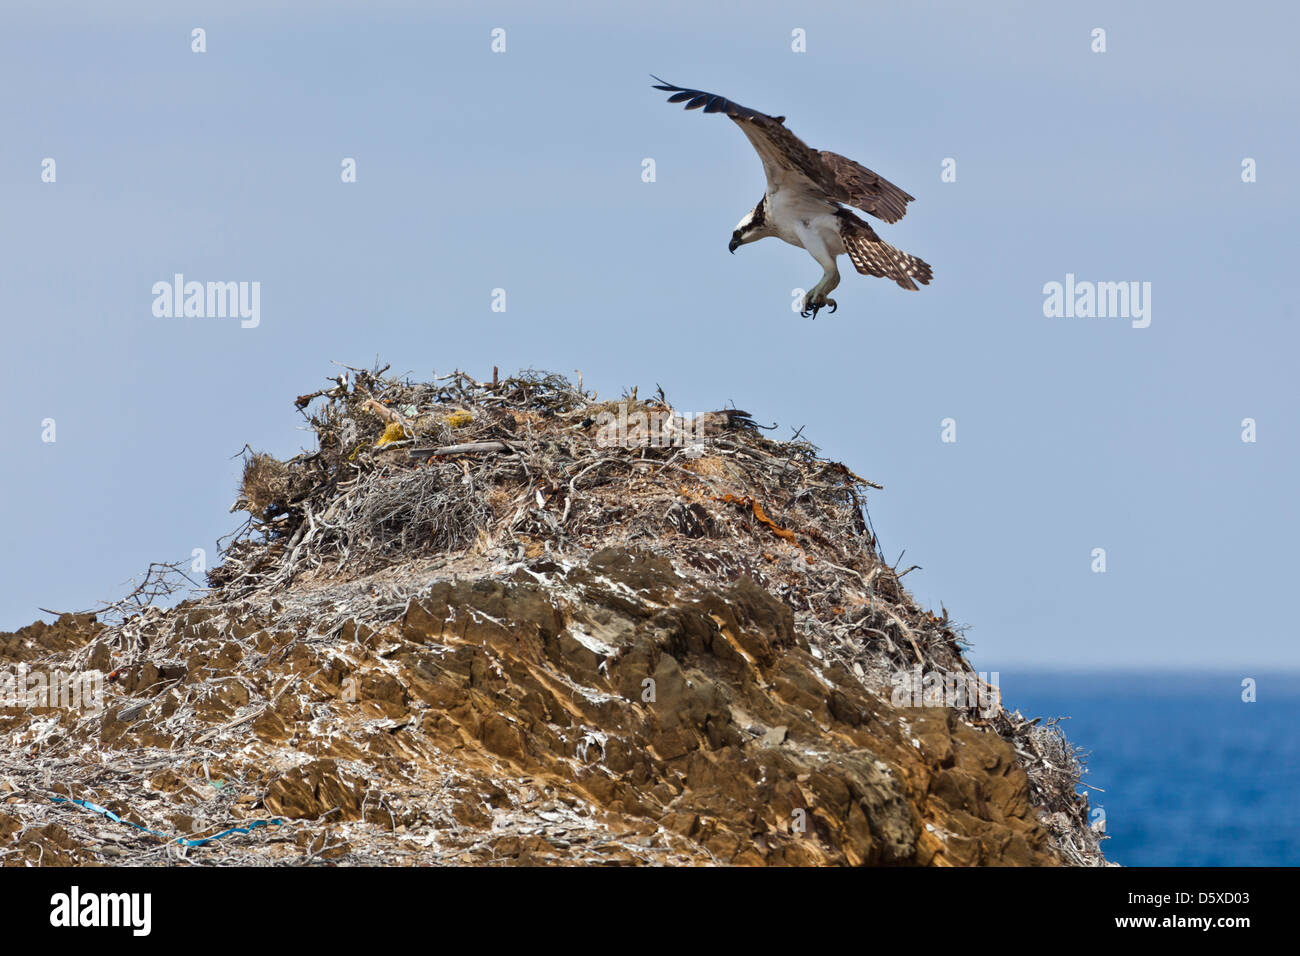 An Osprey, Pandion haliaetus, lands on its nest stacked high on a beach on Isla San Benito Oueste, off Baja California, Mexico. Stock Photo